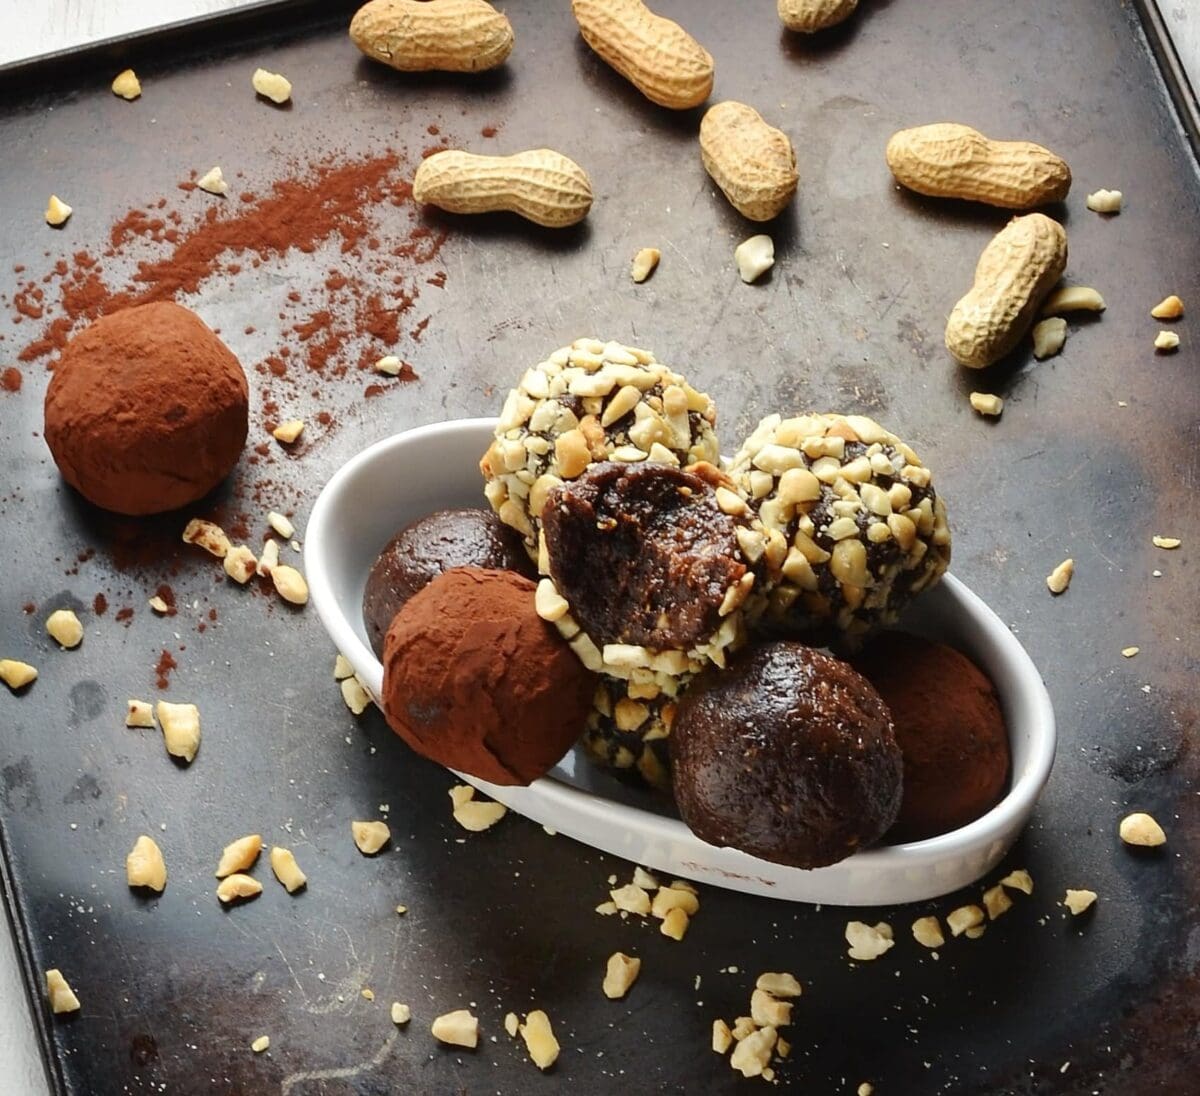 Close-up view of nut and cocoa coated energy balls in white dish with peanuts in background on metallic tray.